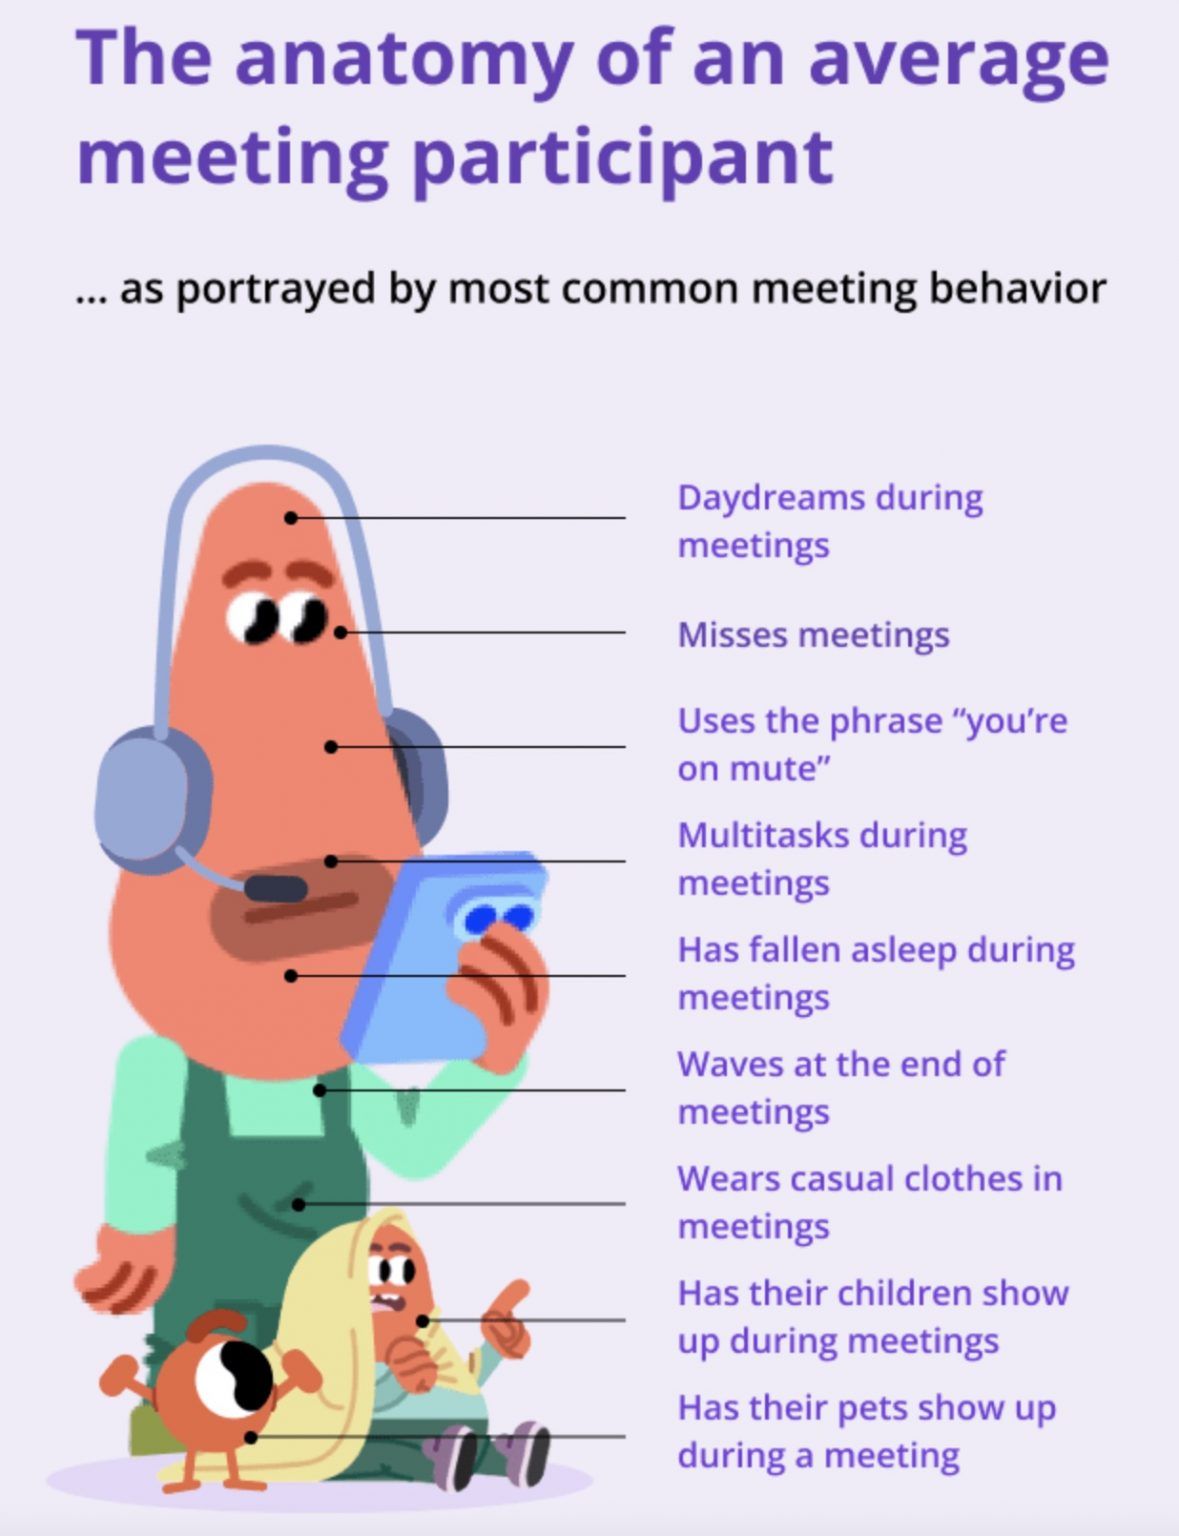 Anatomy of an average meeting participant